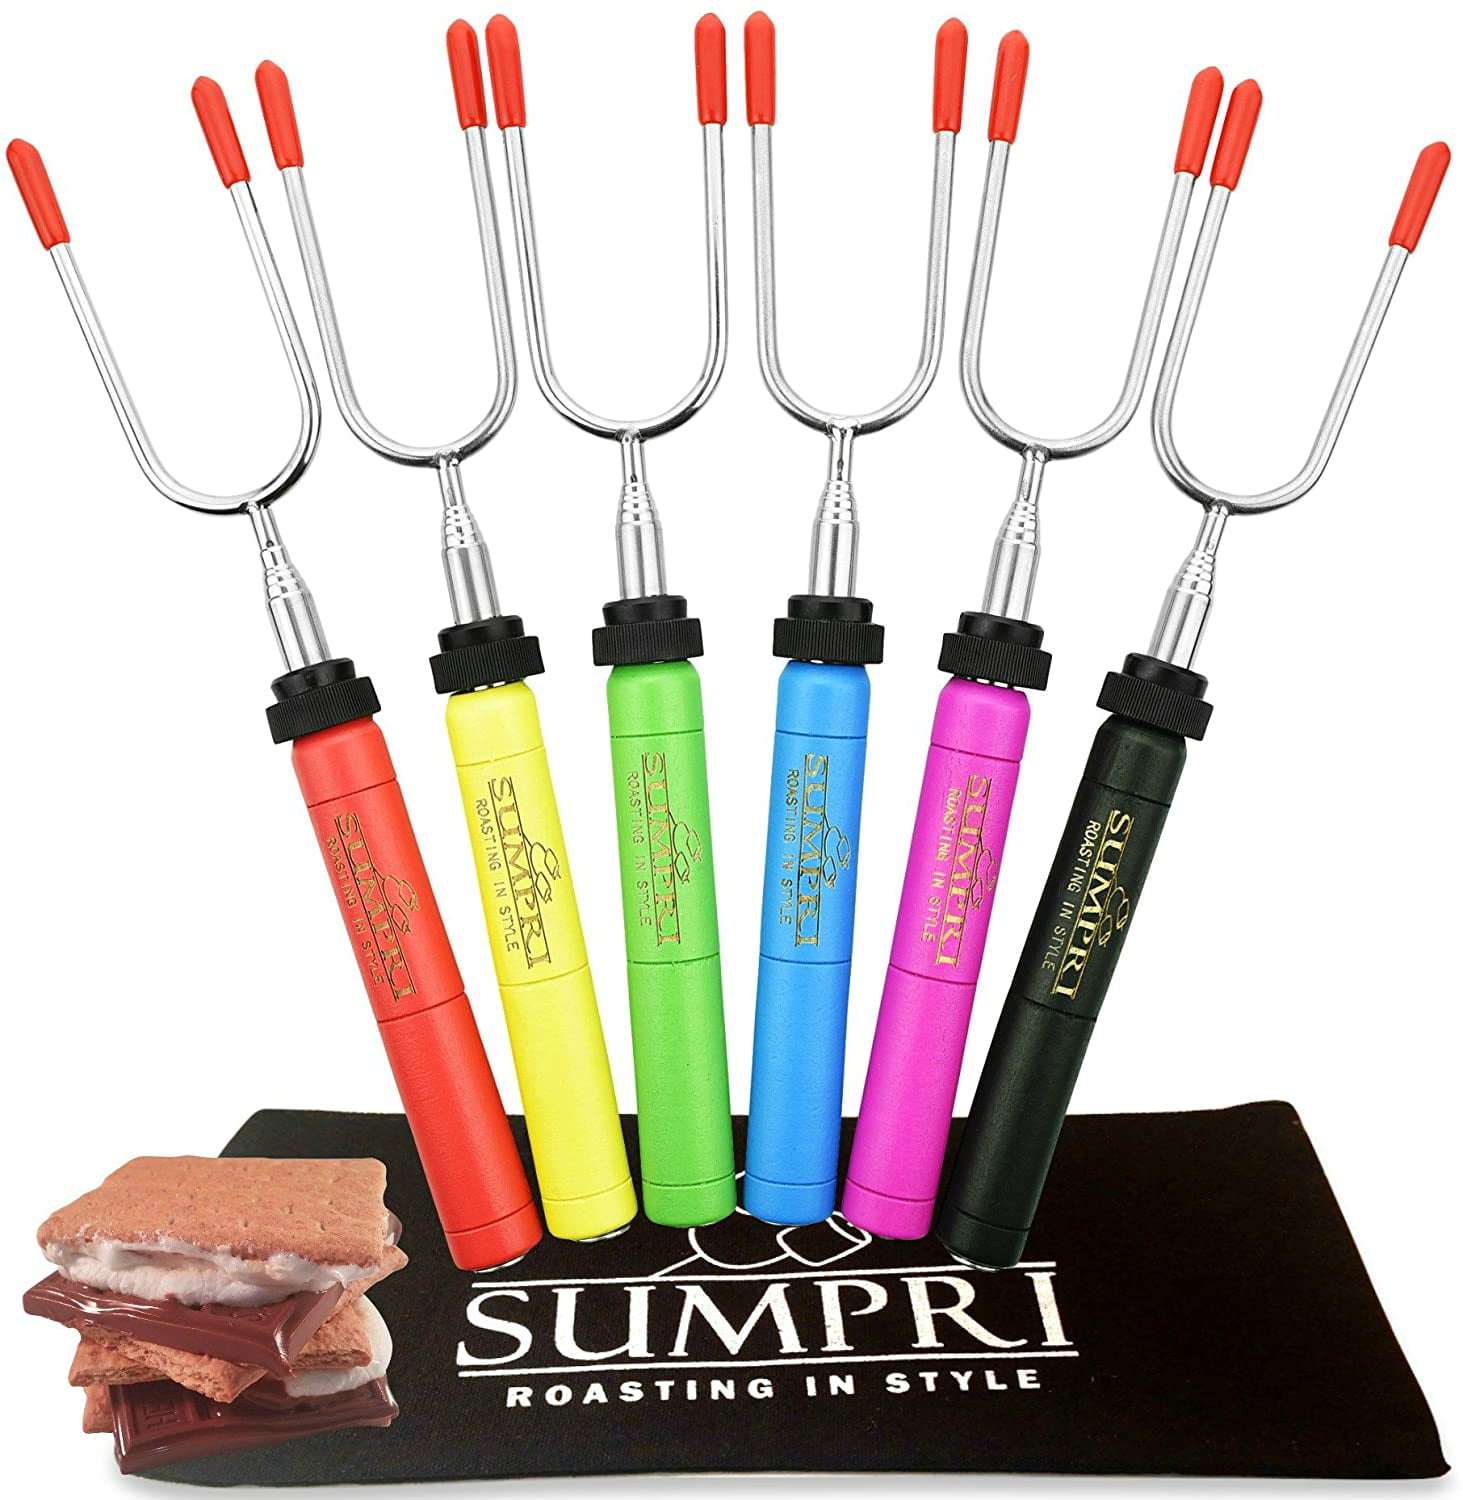 Free Bag Safe Set of 5 Telescoping Forks Extendable Rotating Marshmallow Roasting Sticks Fun Smores & Hot Dog Stainless Steel Long Camping Skewers Campfire BBQ Cookware Accessories